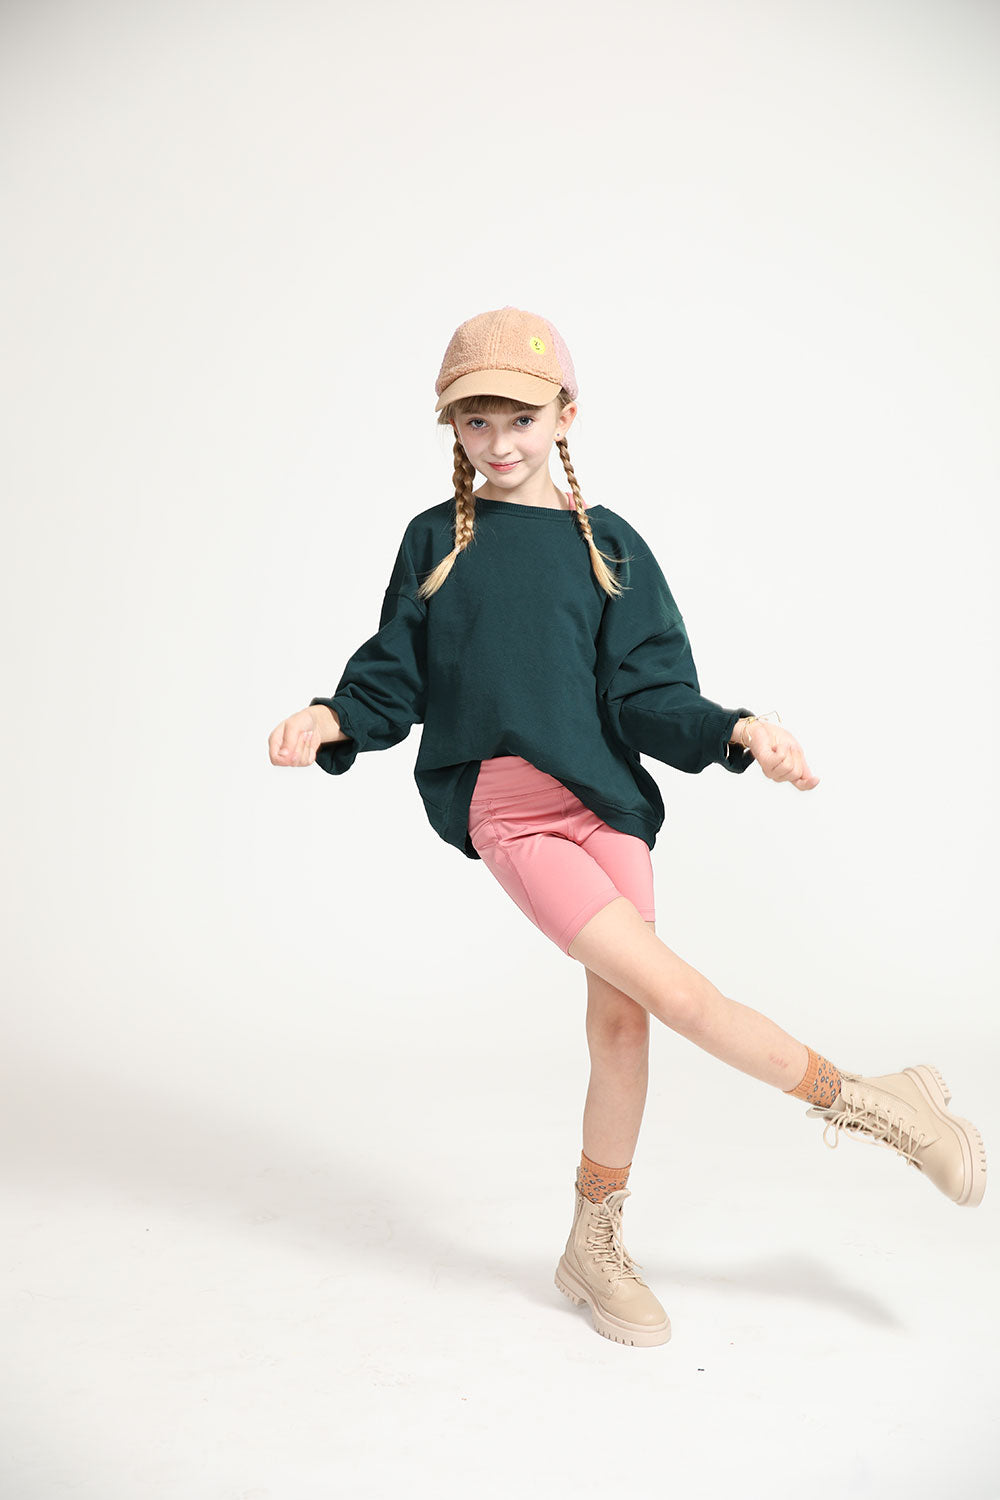 Young girl wearing Everyway kids activewear. Featuring Cycle Shorts in Dusty Rose.